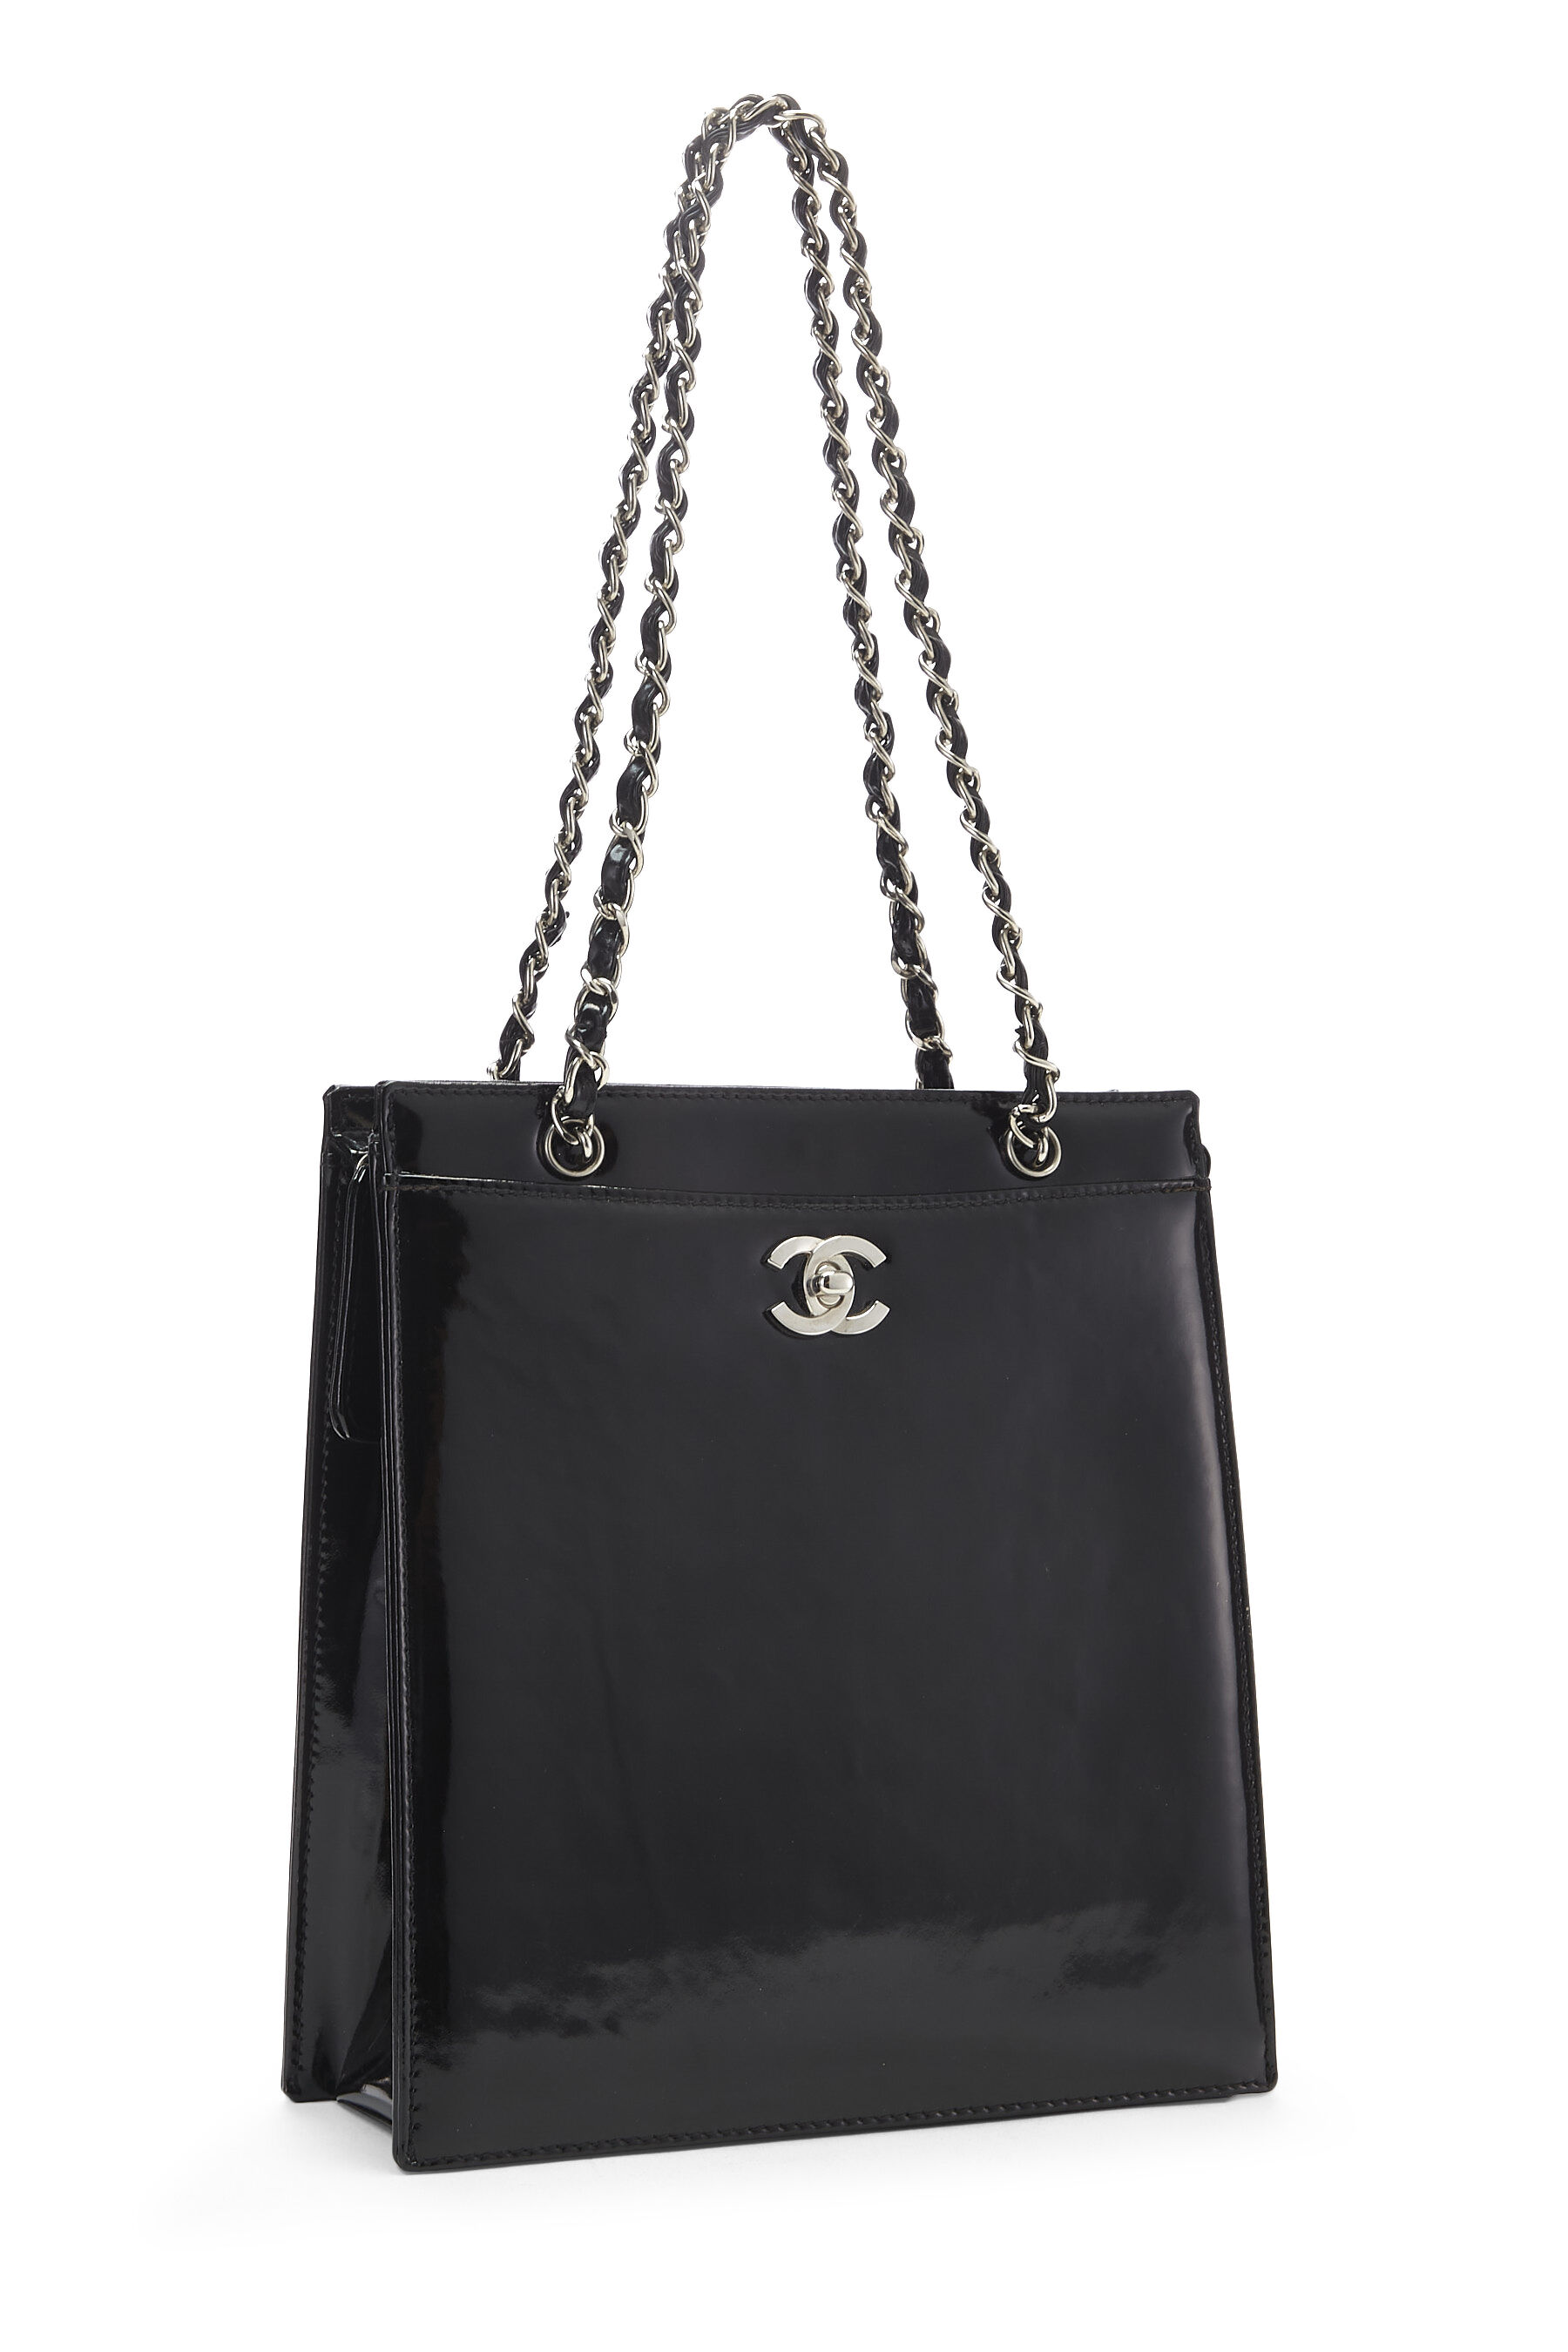 Patent leather handbag Chanel Black in Patent leather - 32754936